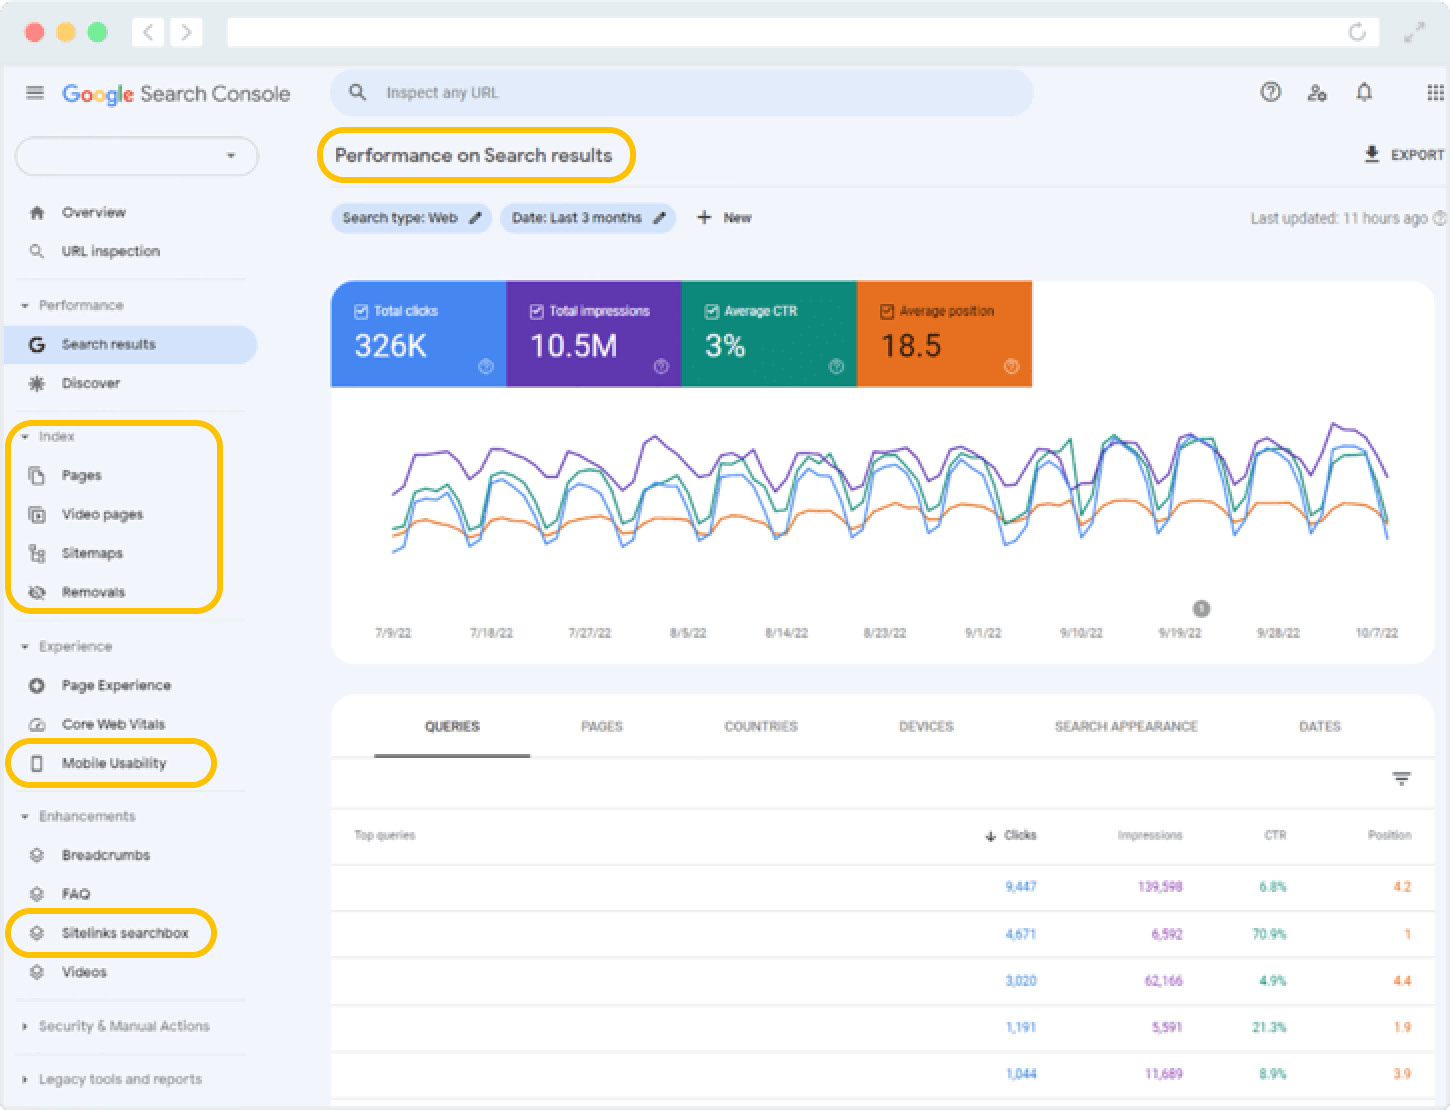 Use Google Search Console to keep an eye on your website performance and nonprofit keywords.